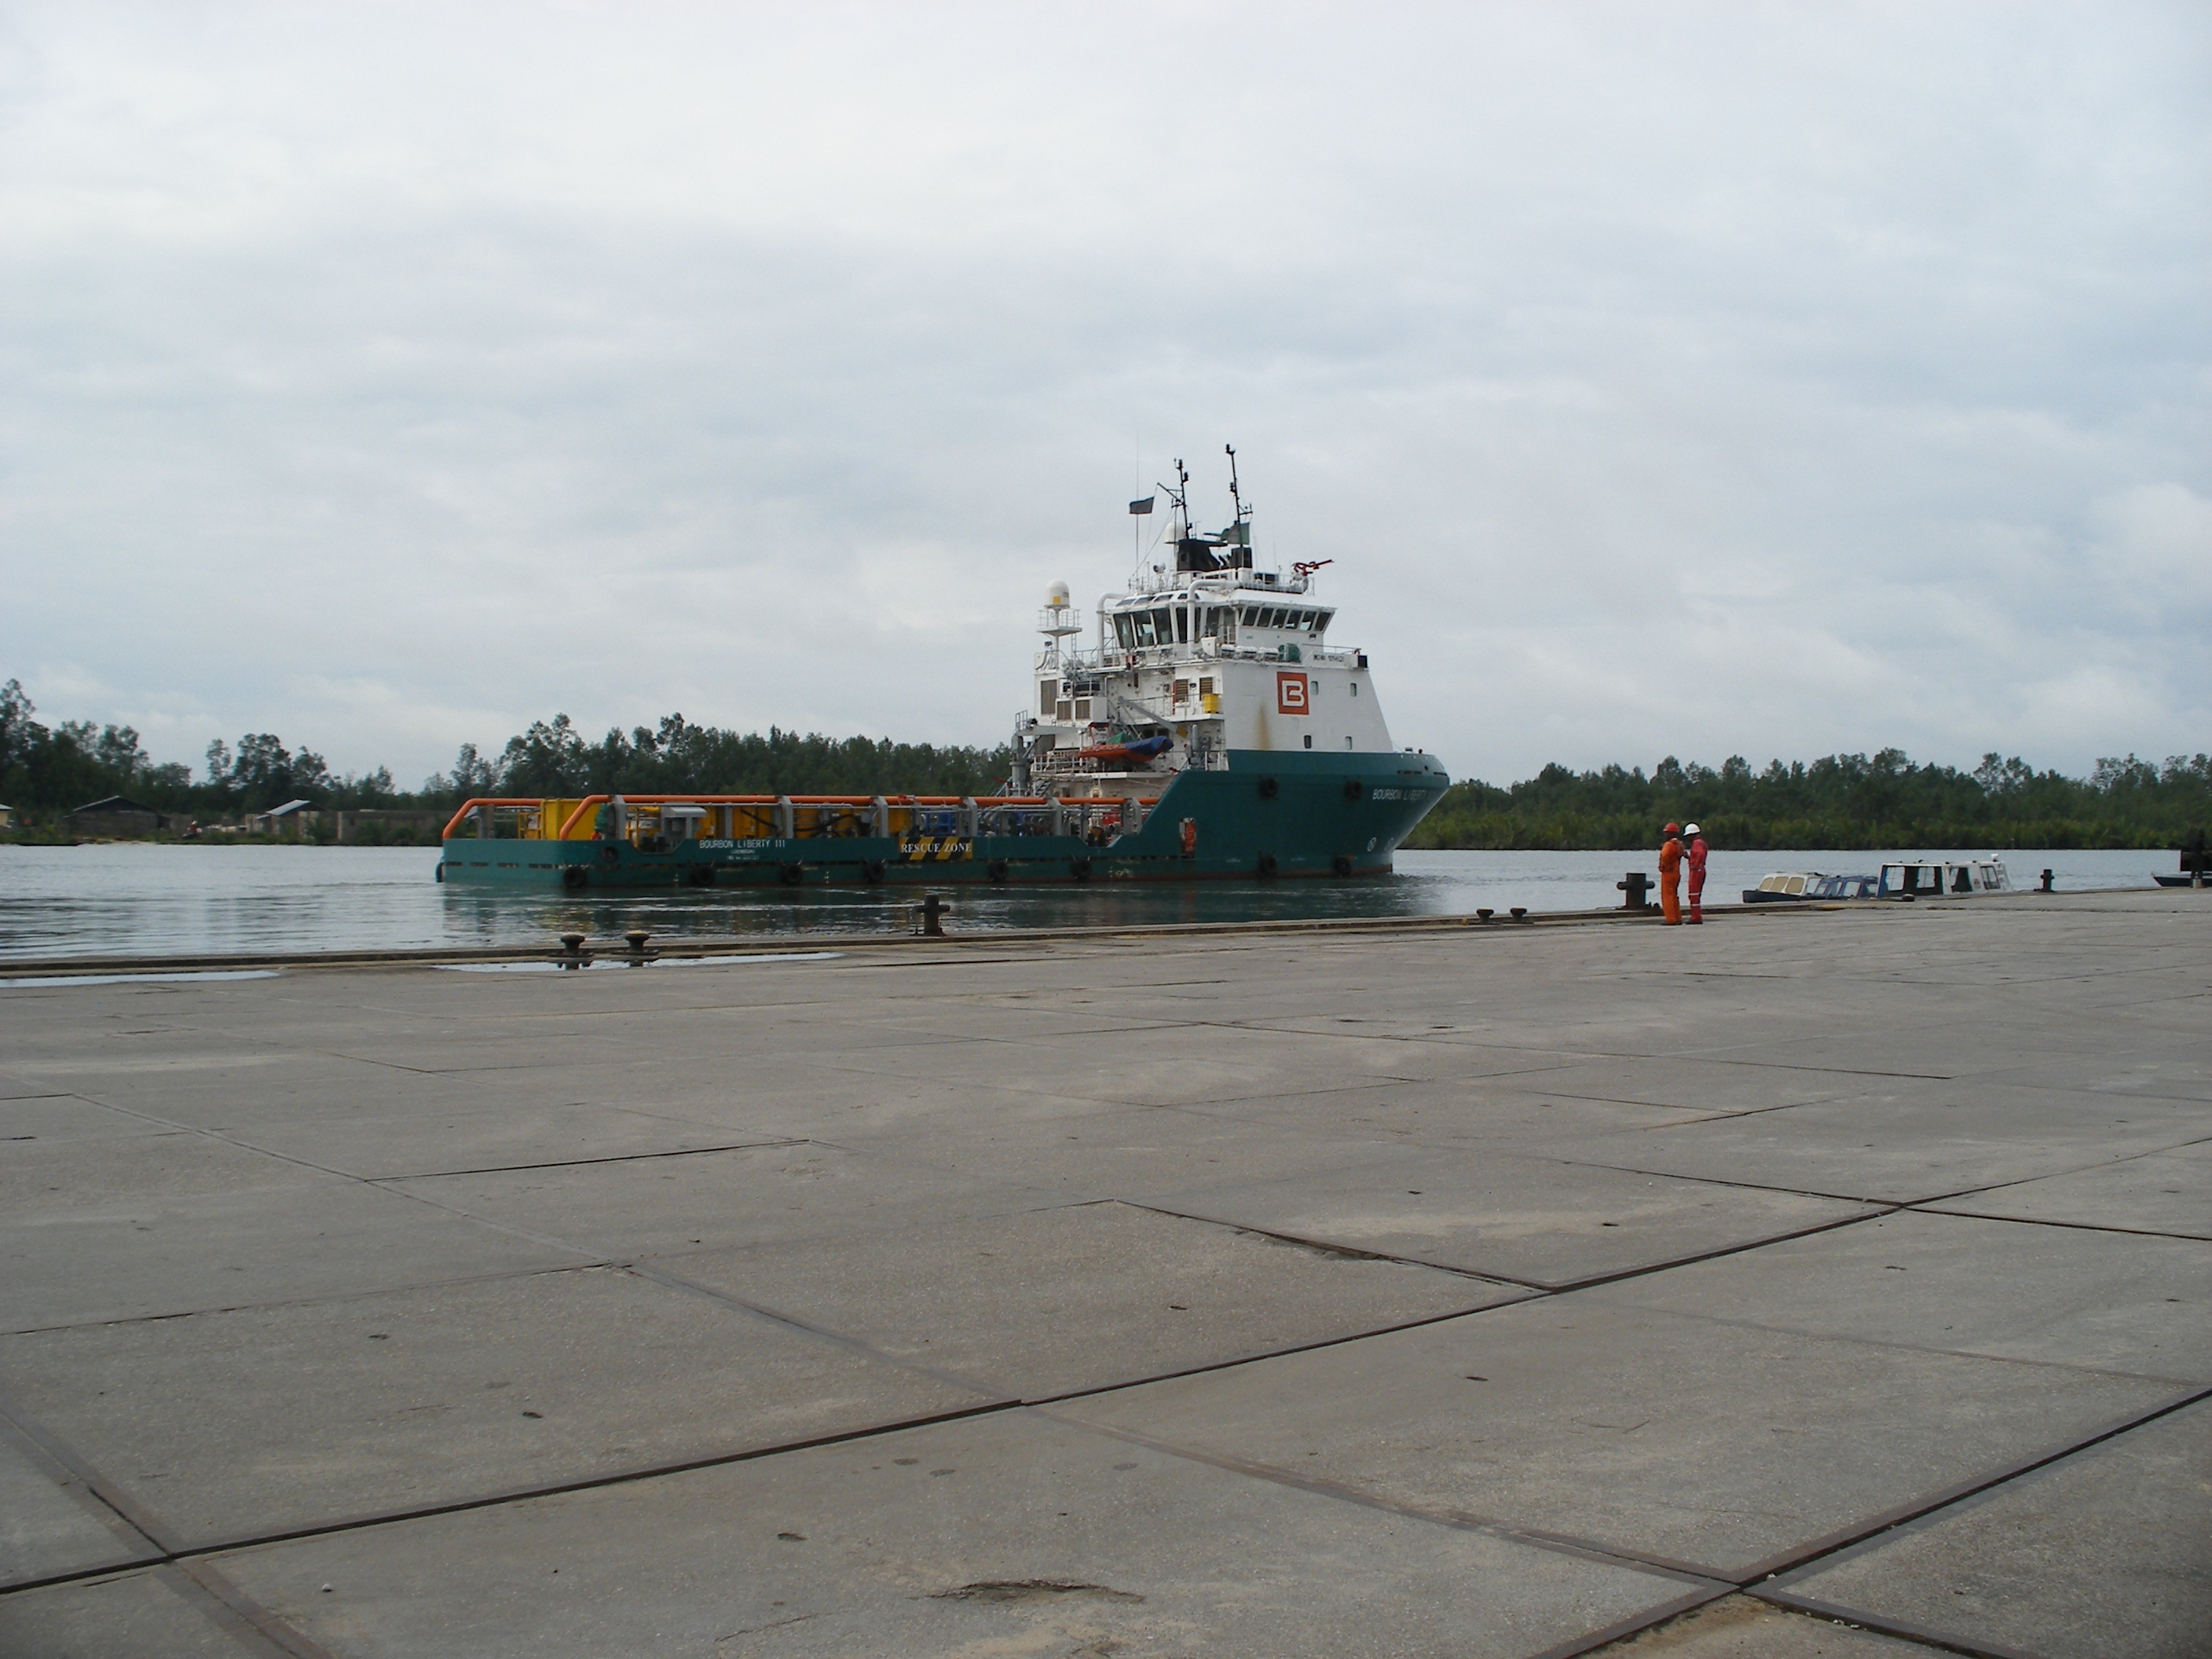 Departure of Addax work boat heading to the Deepwater Pathfinder